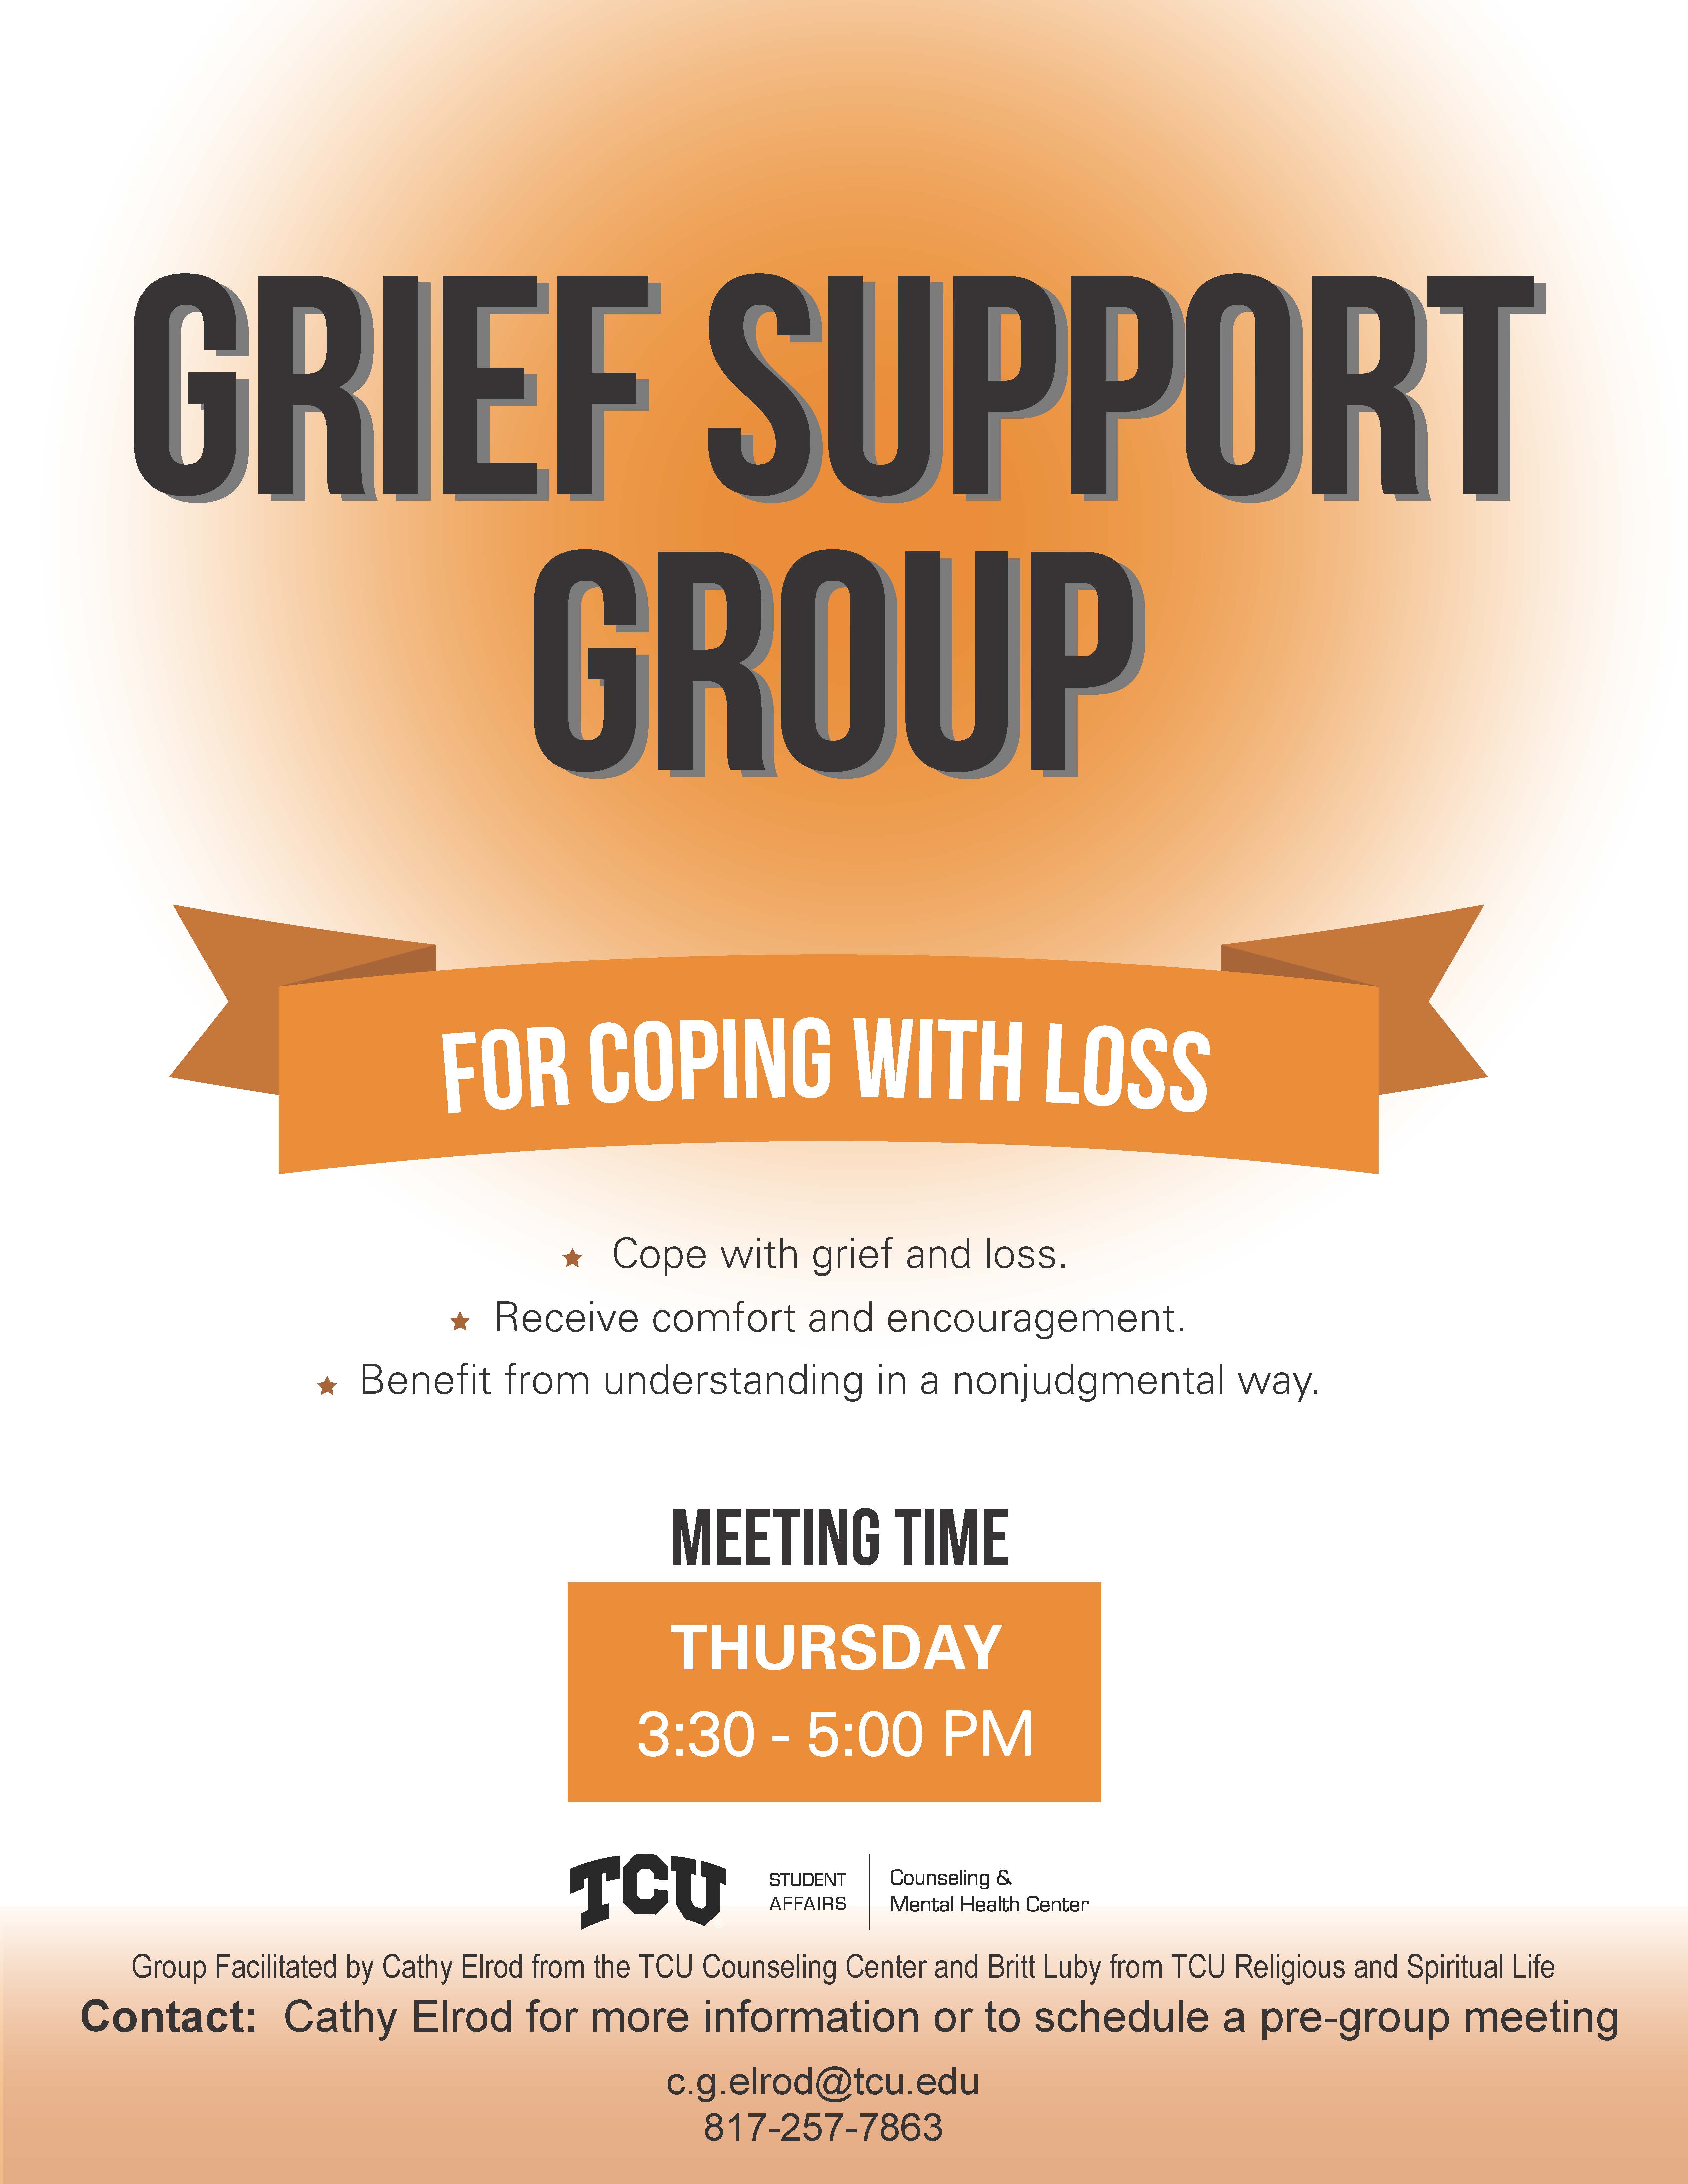 Grief Support Group Flyer Template